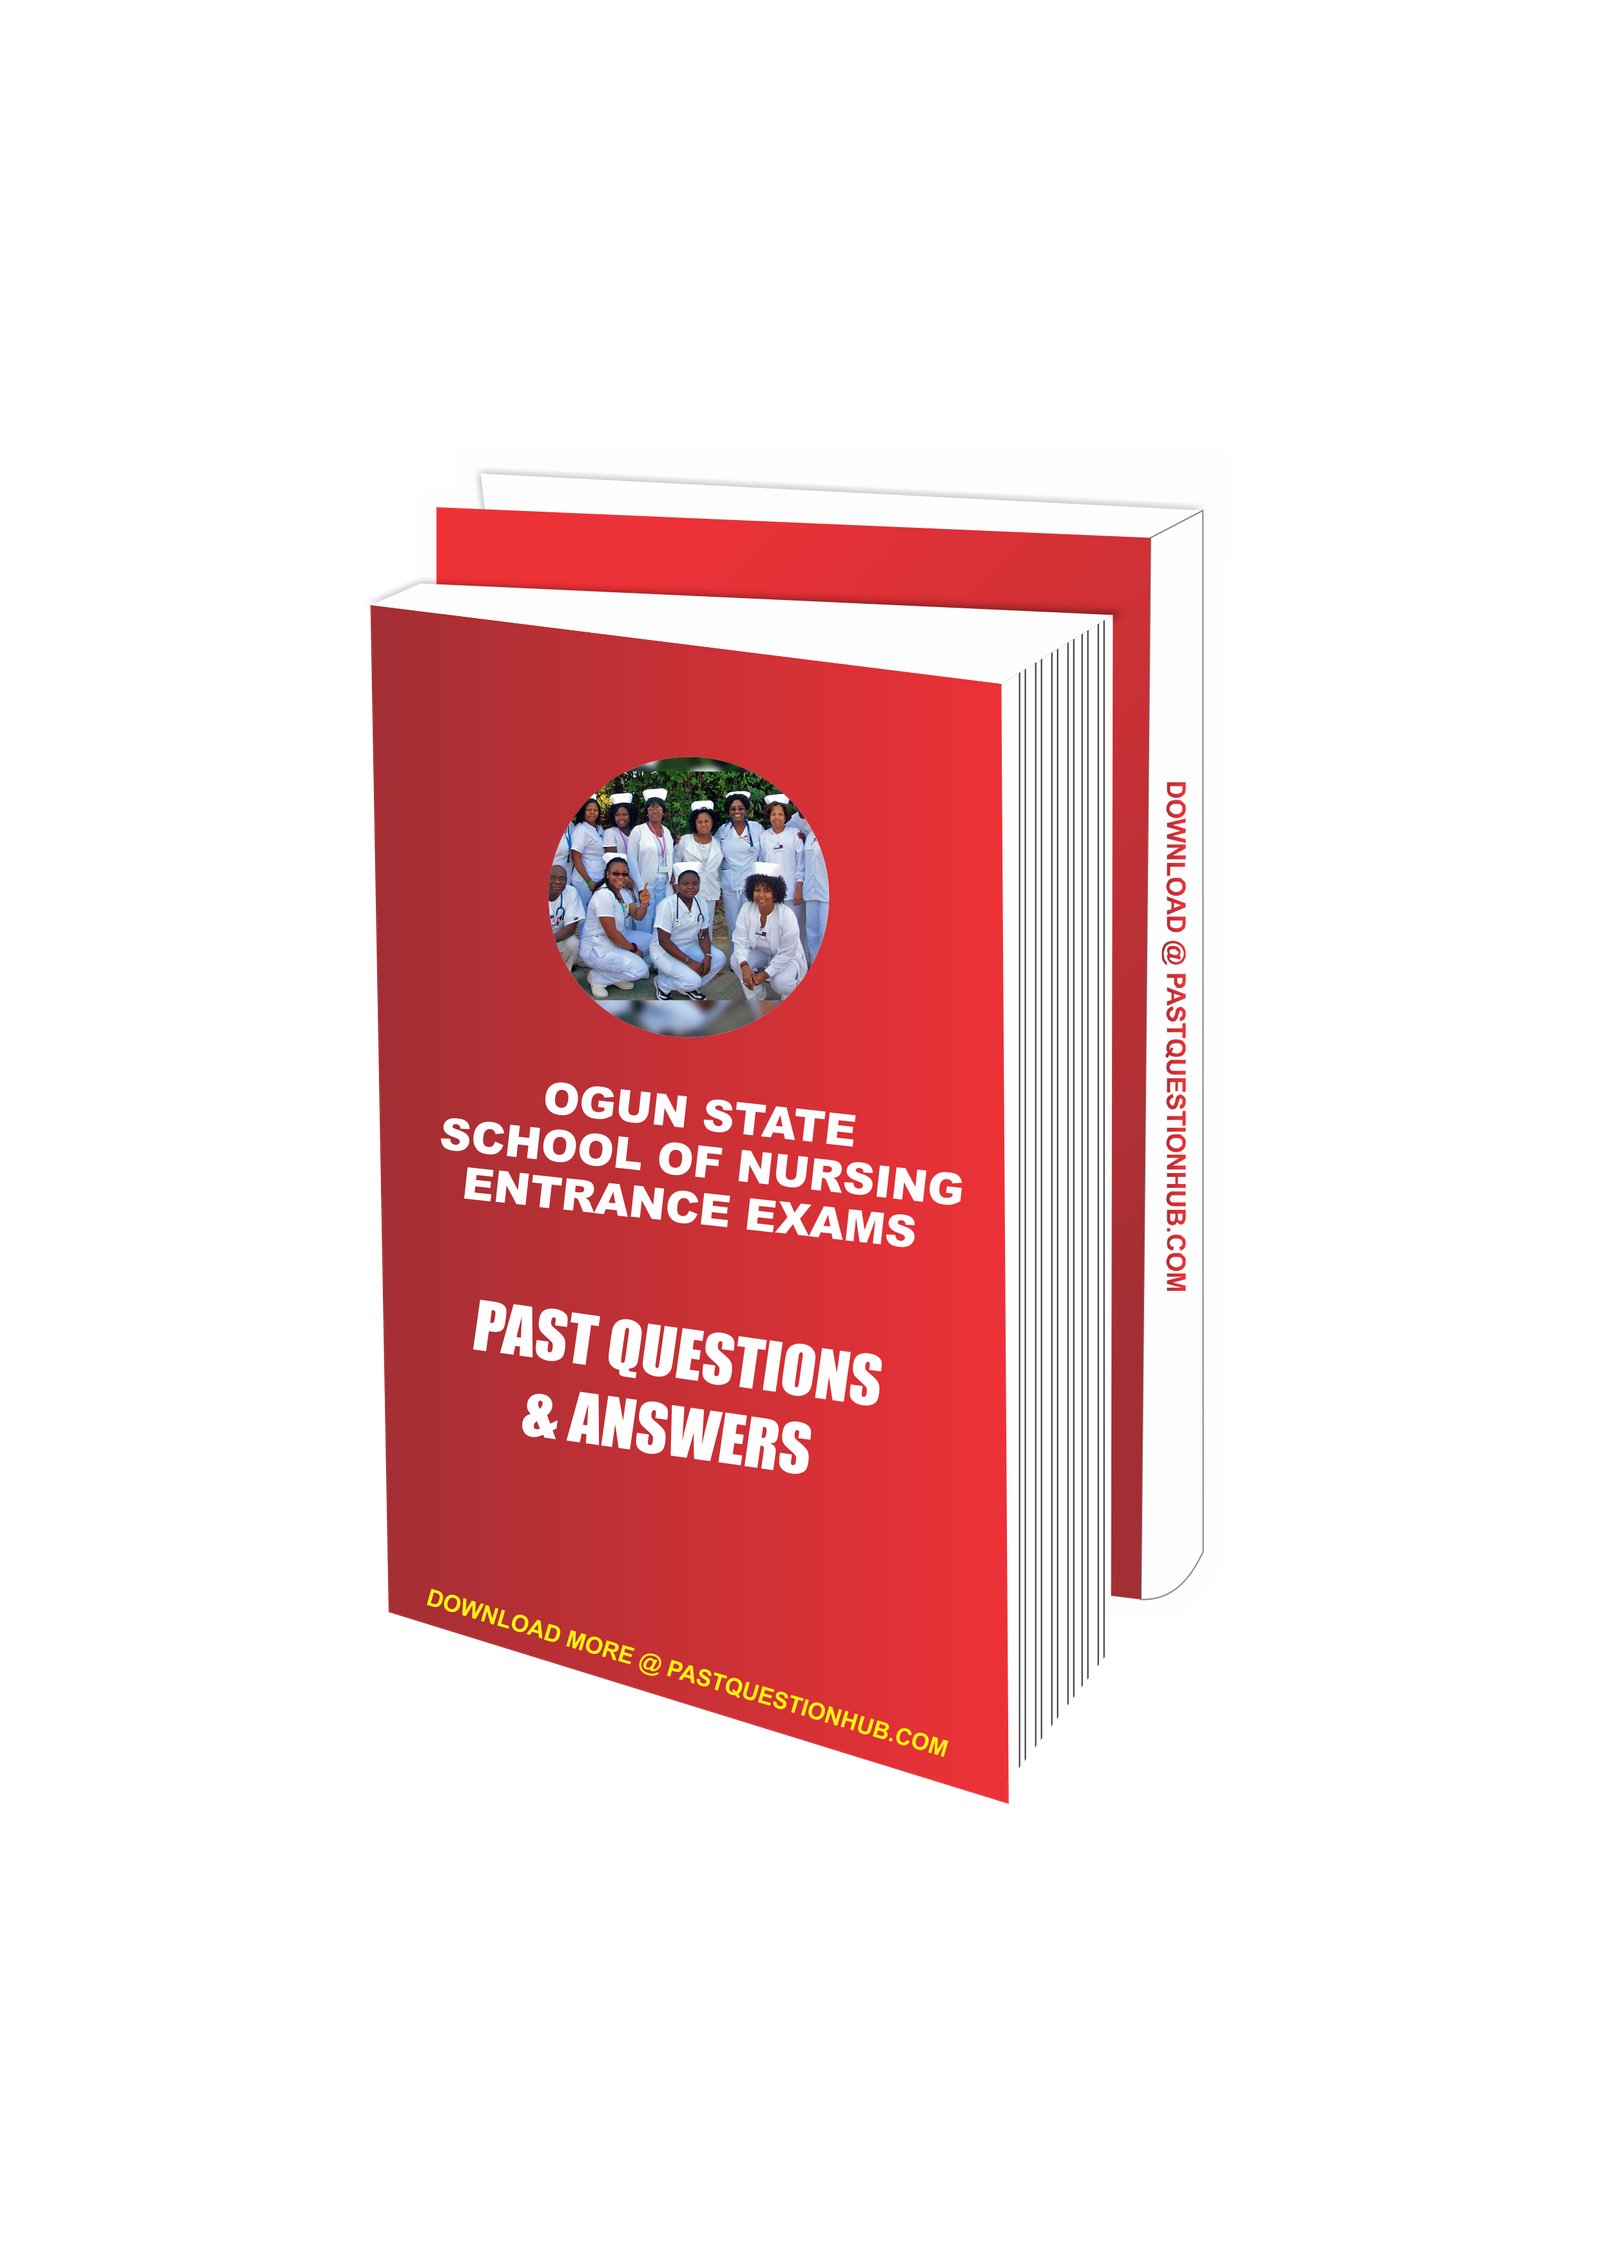 Download Ogun State School of Nursing Past Questions and Answers | Ogun School of Nursing entrance examination questions with correct answers P